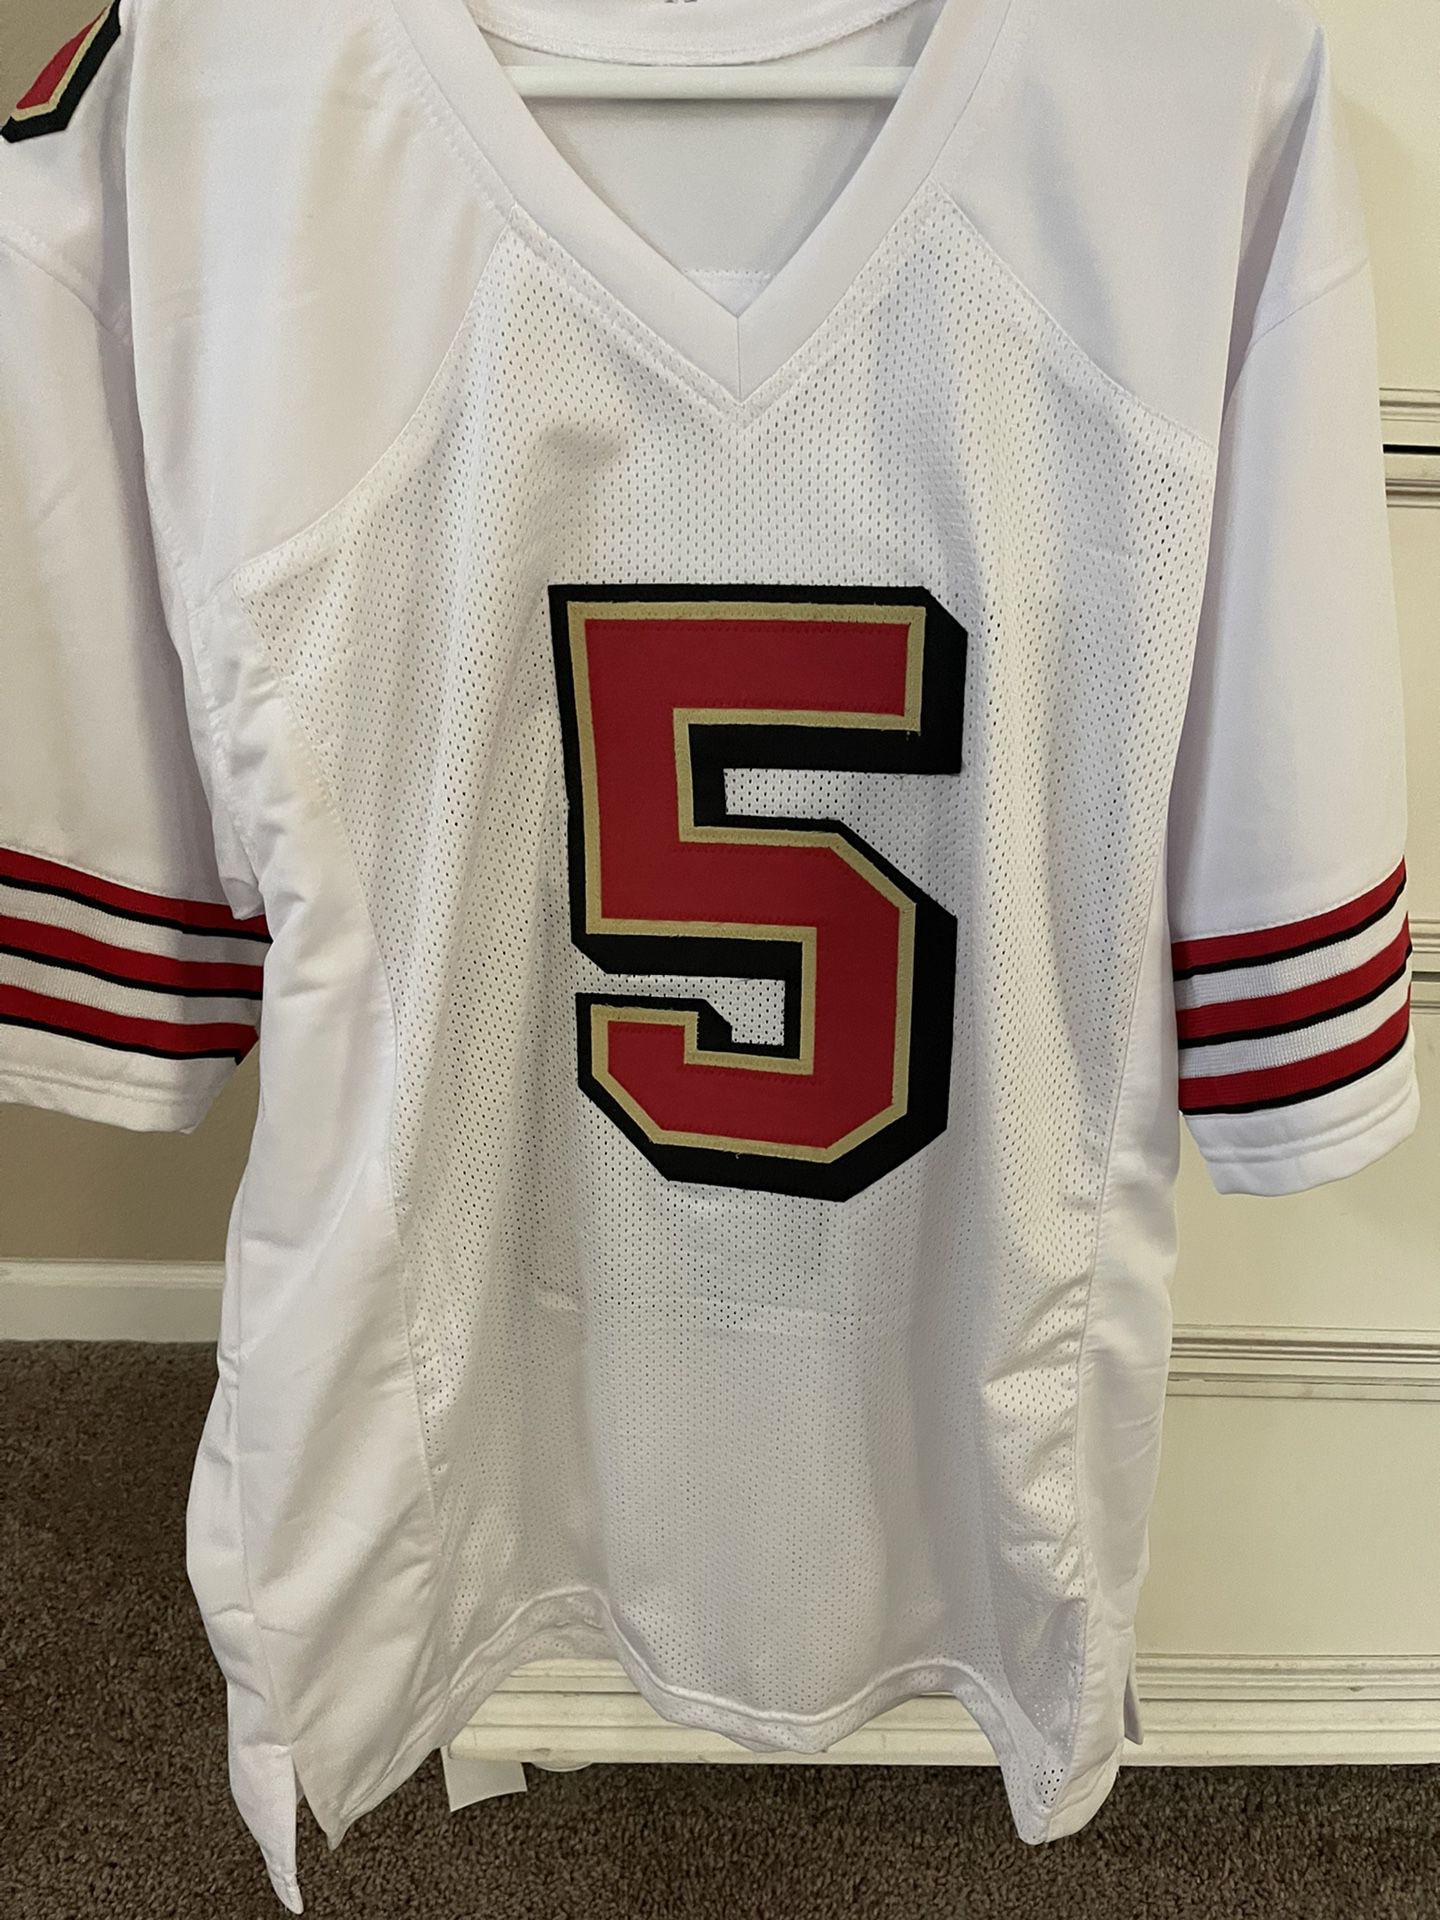 Autographed Jeff Garcia Jersey for Sale in Byron, CA - OfferUp